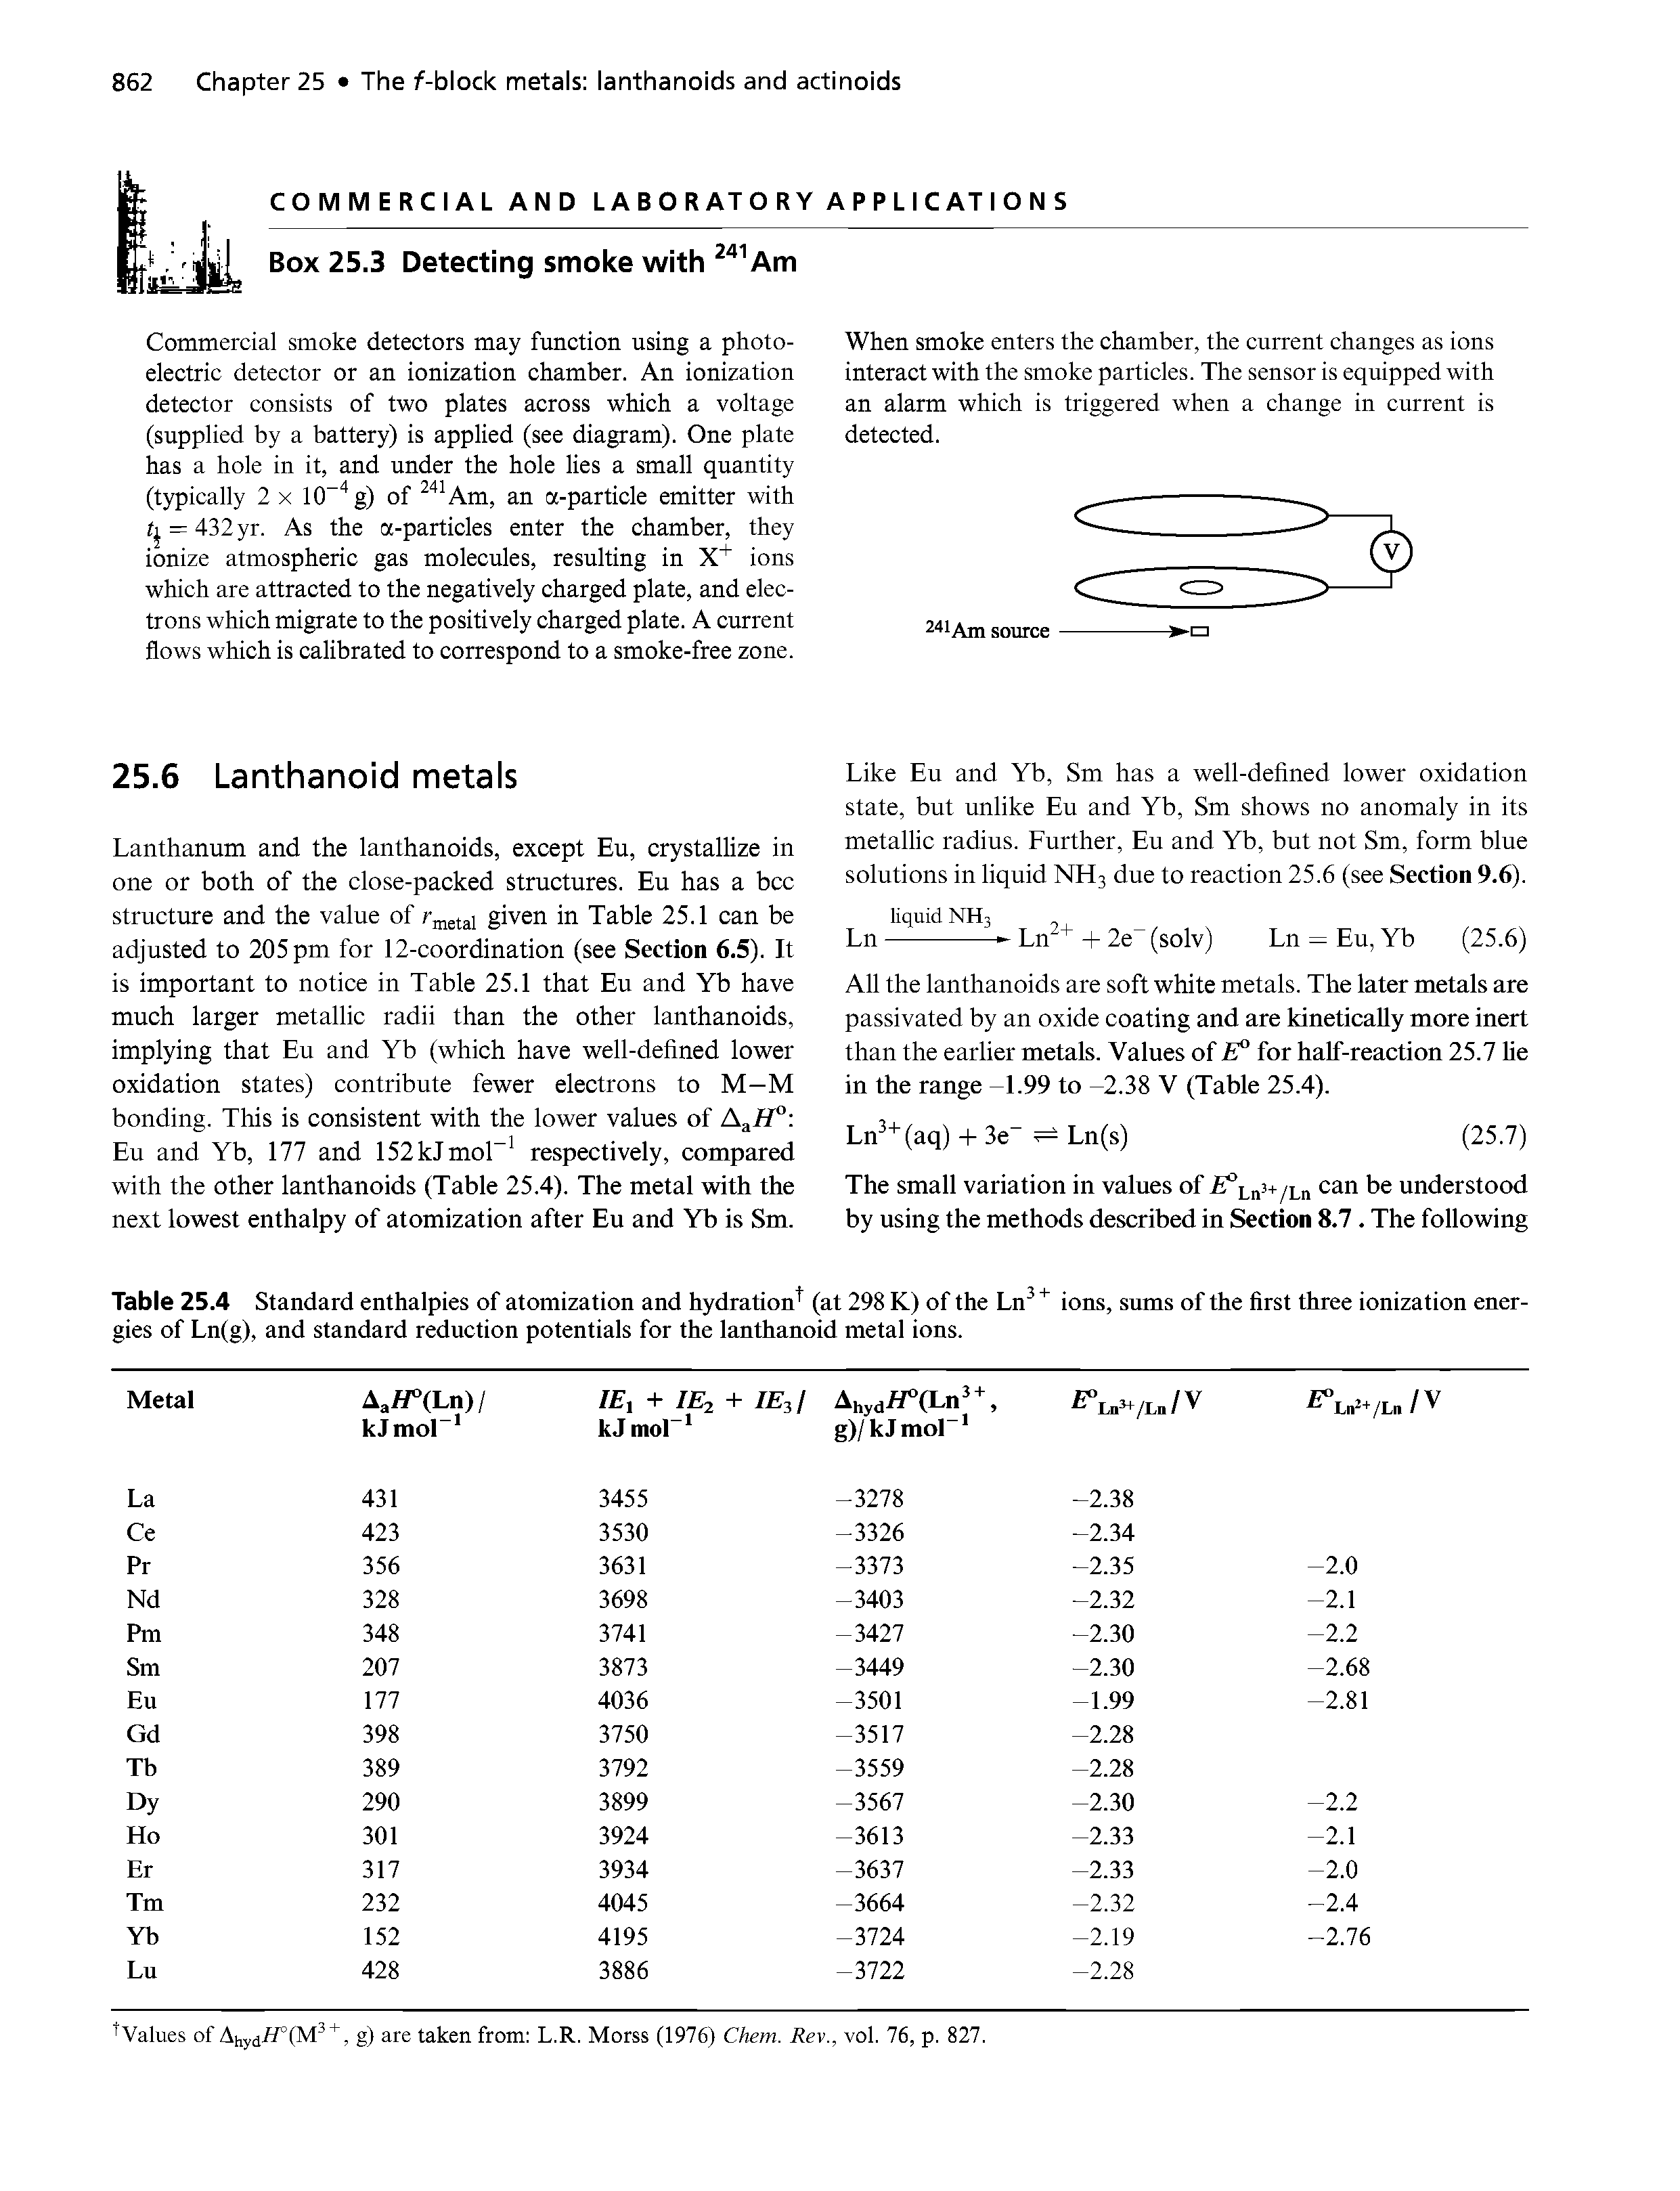 Table 25.4 Standard enthalpies of atomization and hydration (at 298 K) of the Ln ions, sums of the first three ionization energies of Ln(g), and standard reduction potentials for the lanthanoid metal ions.